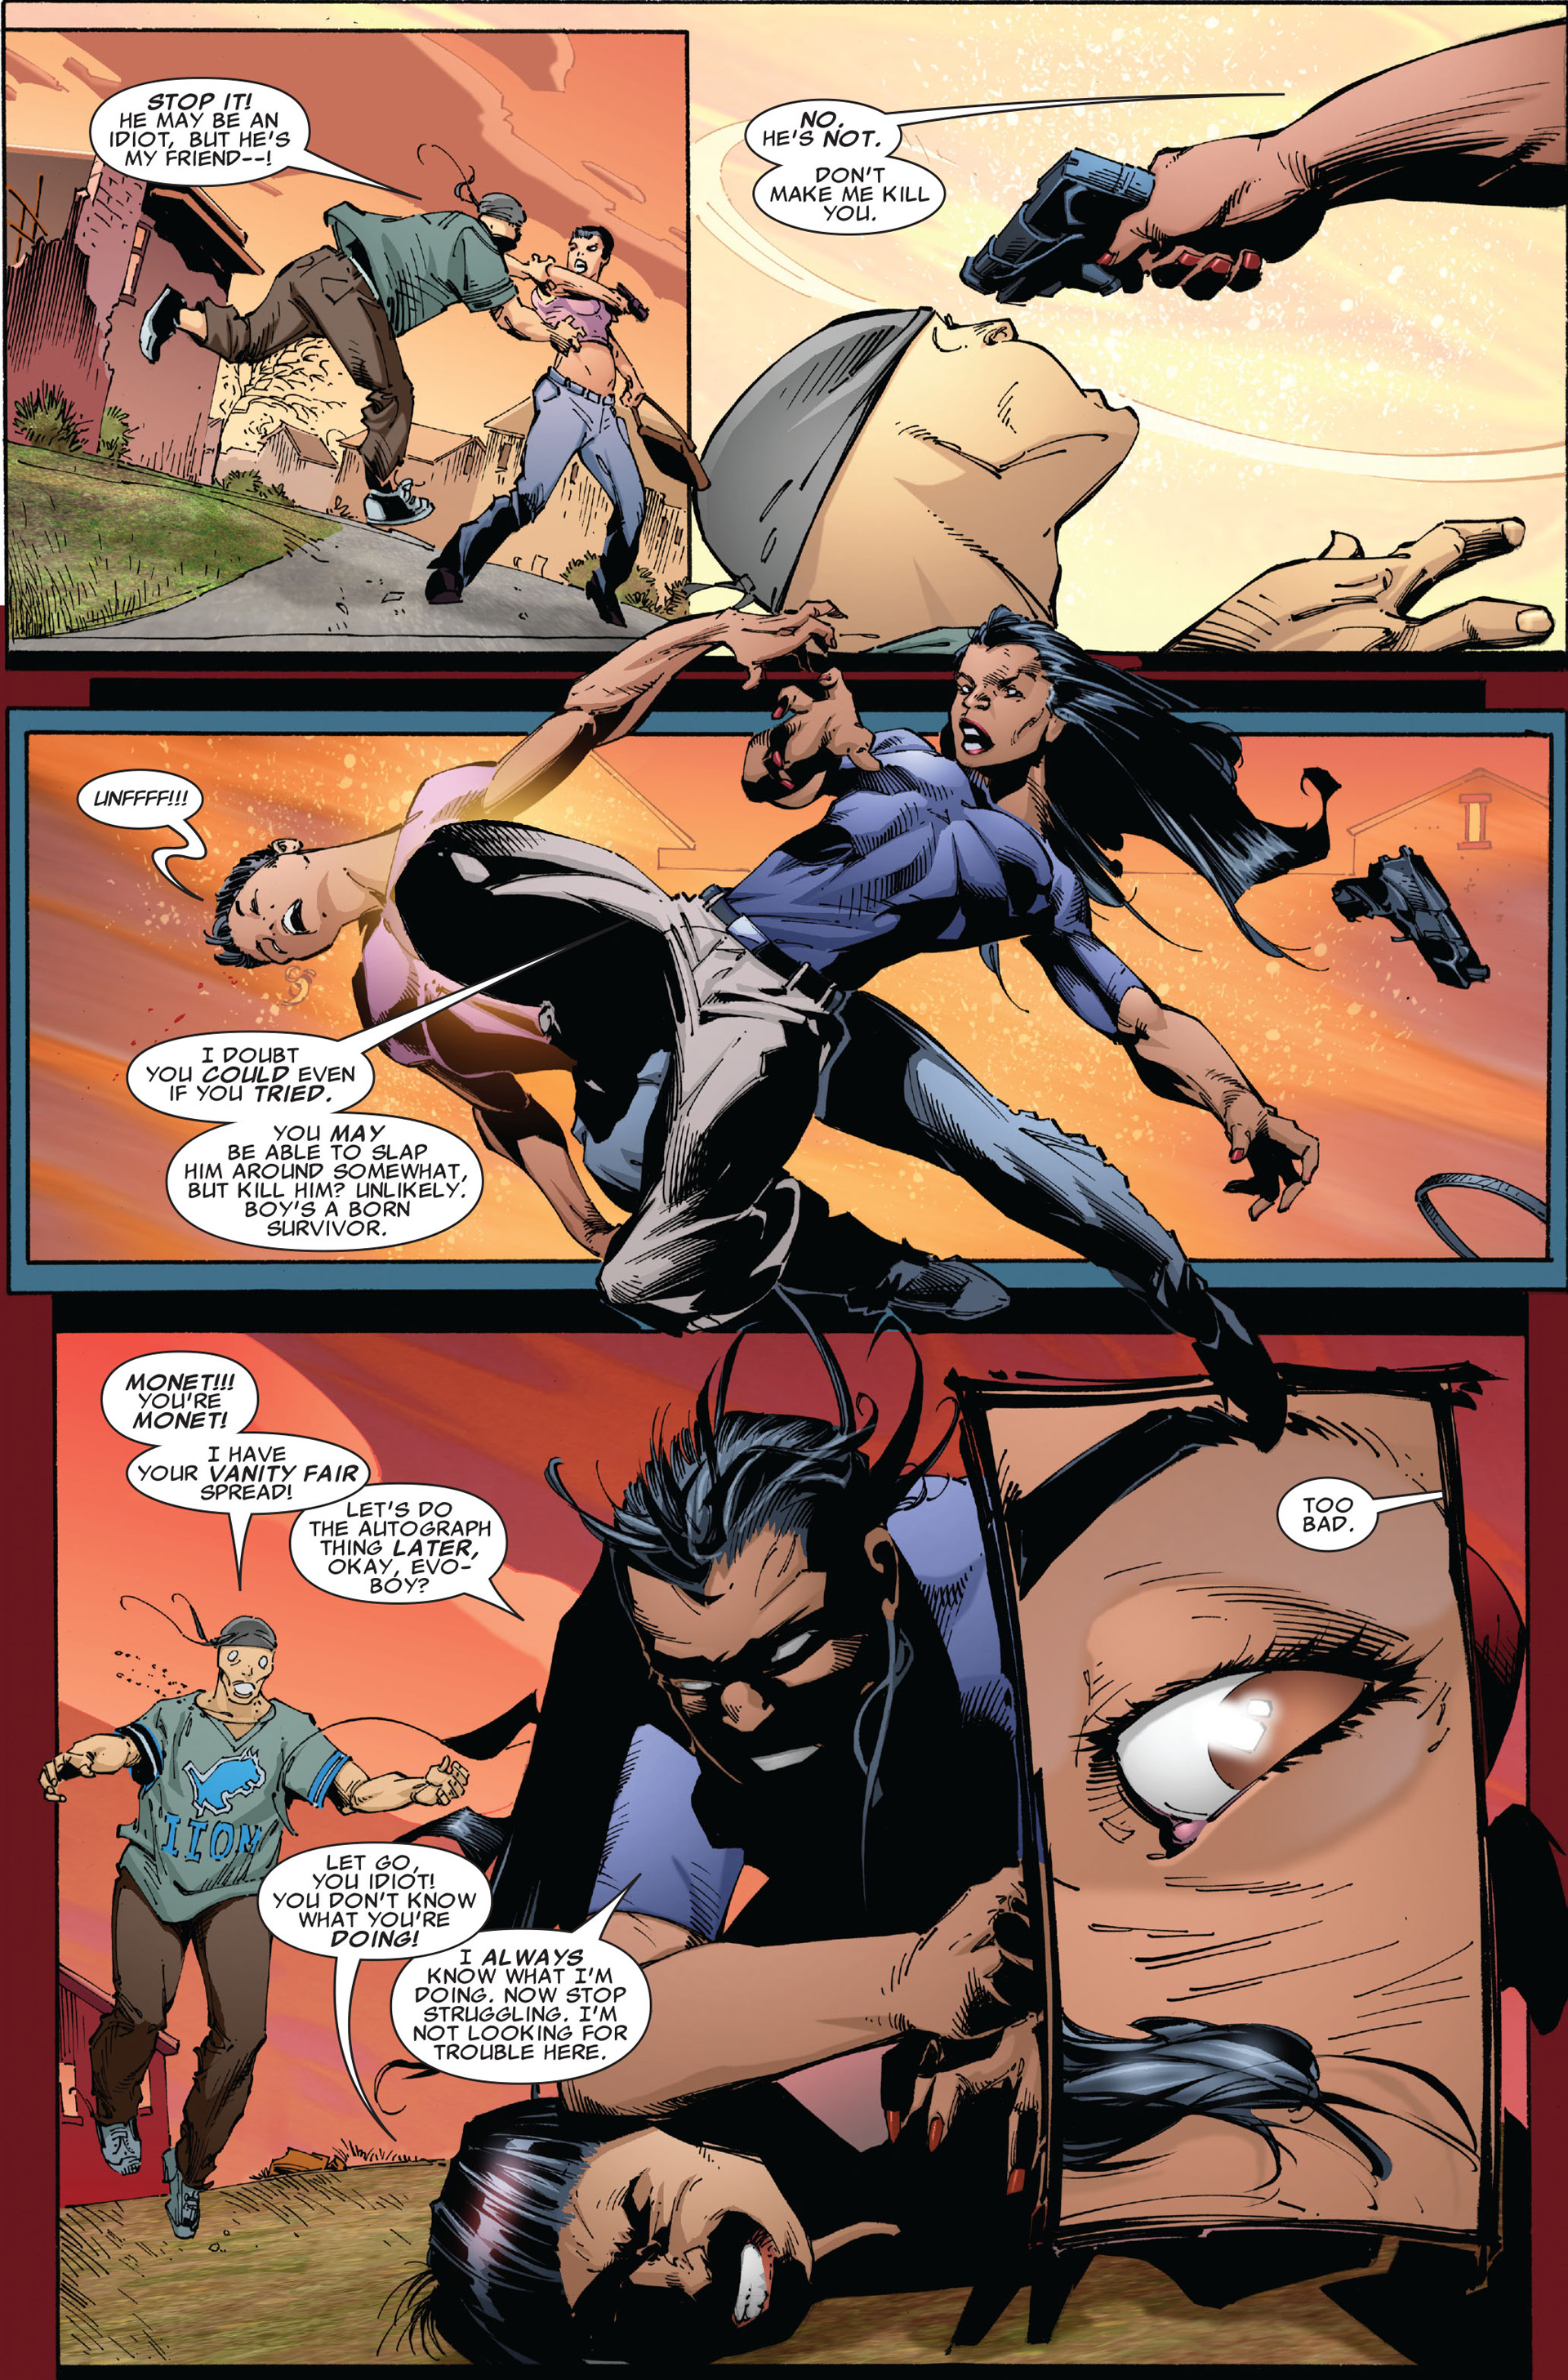 X-Factor (2006) 33 Page 23